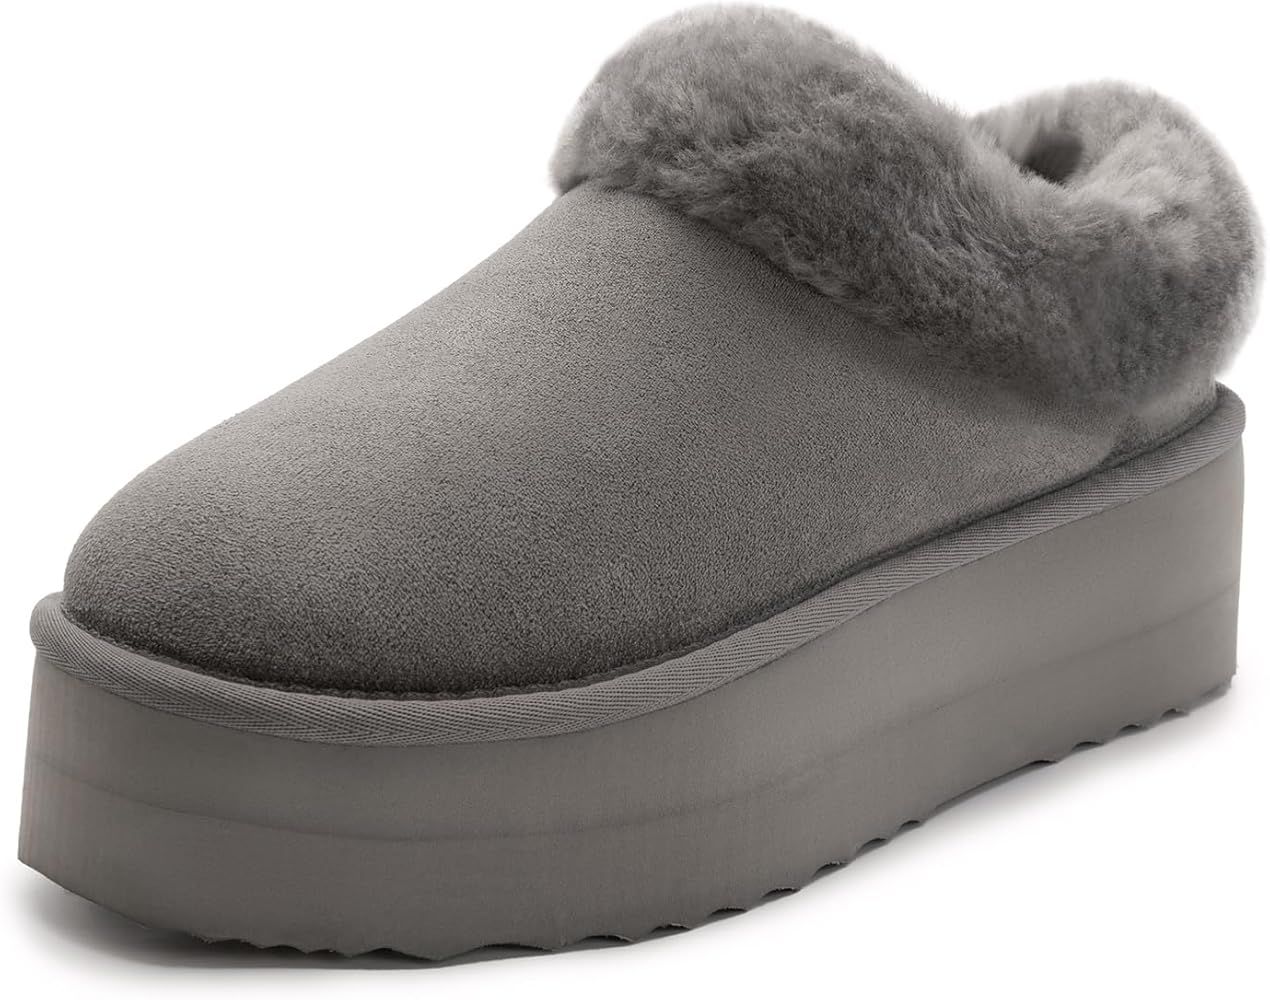 Athlefit Women's Fuzzy Platform Slippers Warm Cozy Indoor Outdoor Fur Lined Clog Slippers | Amazon (US)